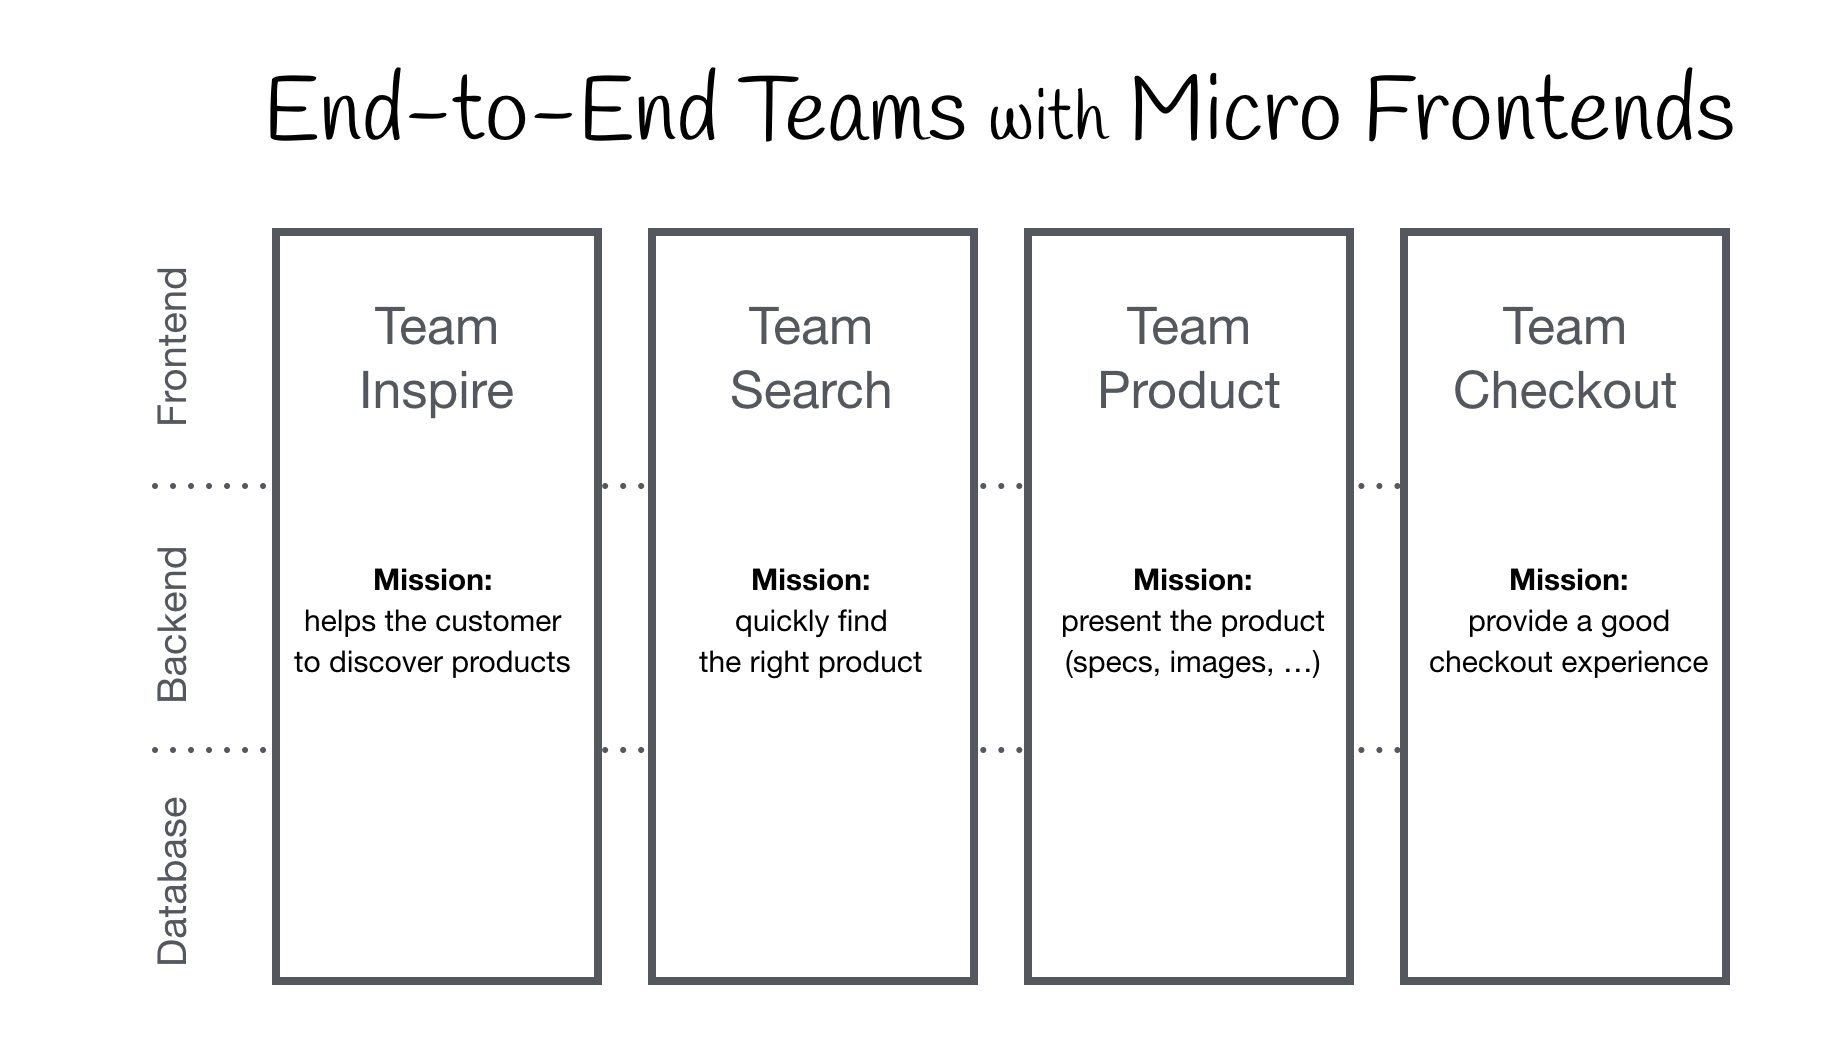 End-To-End Teams with Micro Frontends